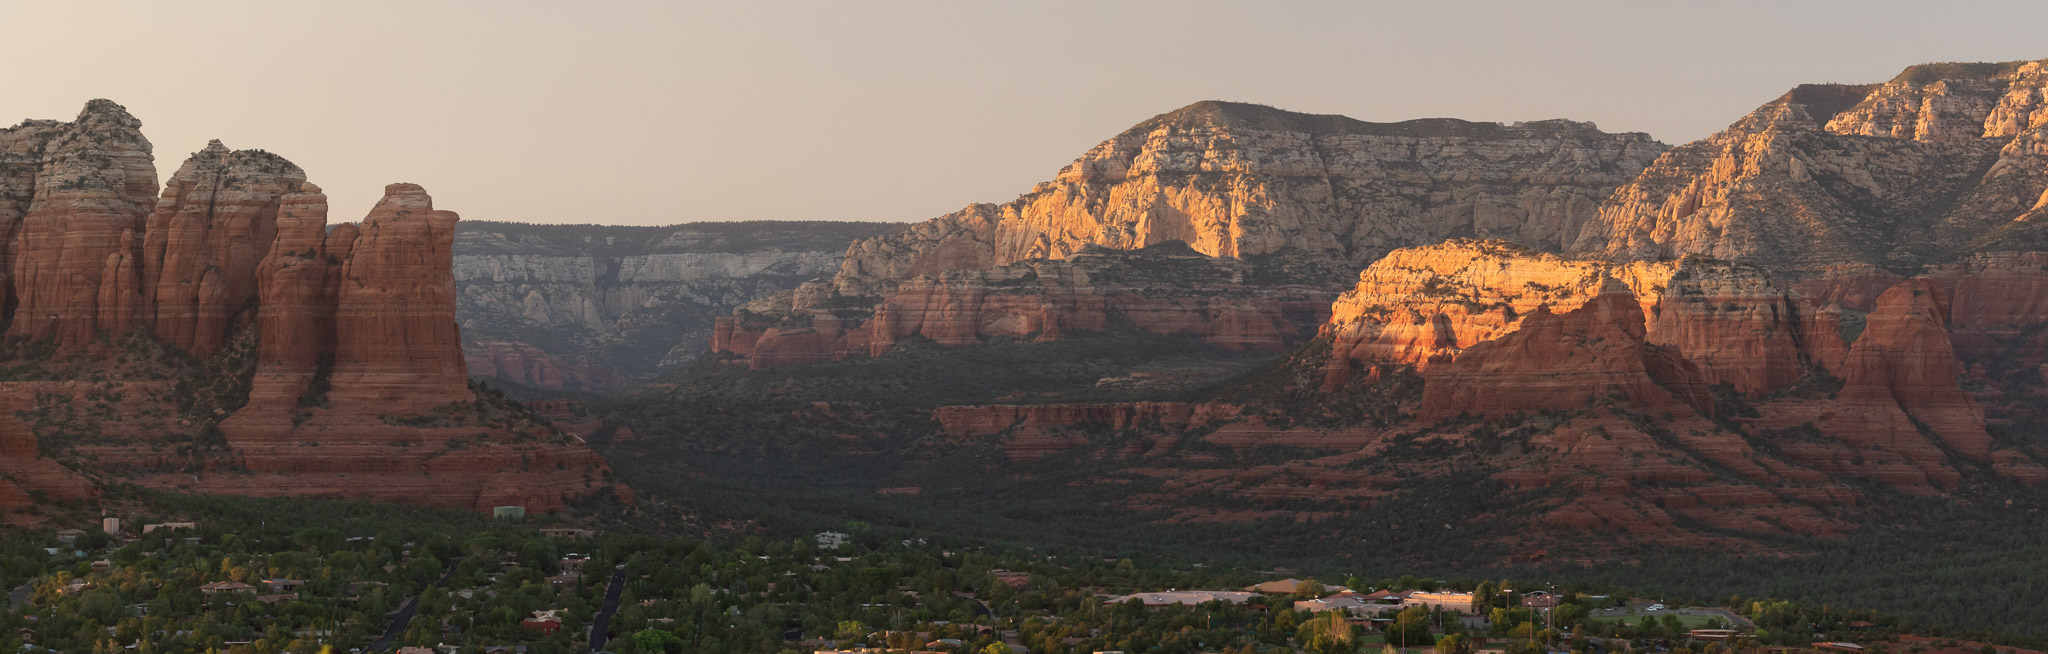 Coffee Pot Rock and other mesas during sunset